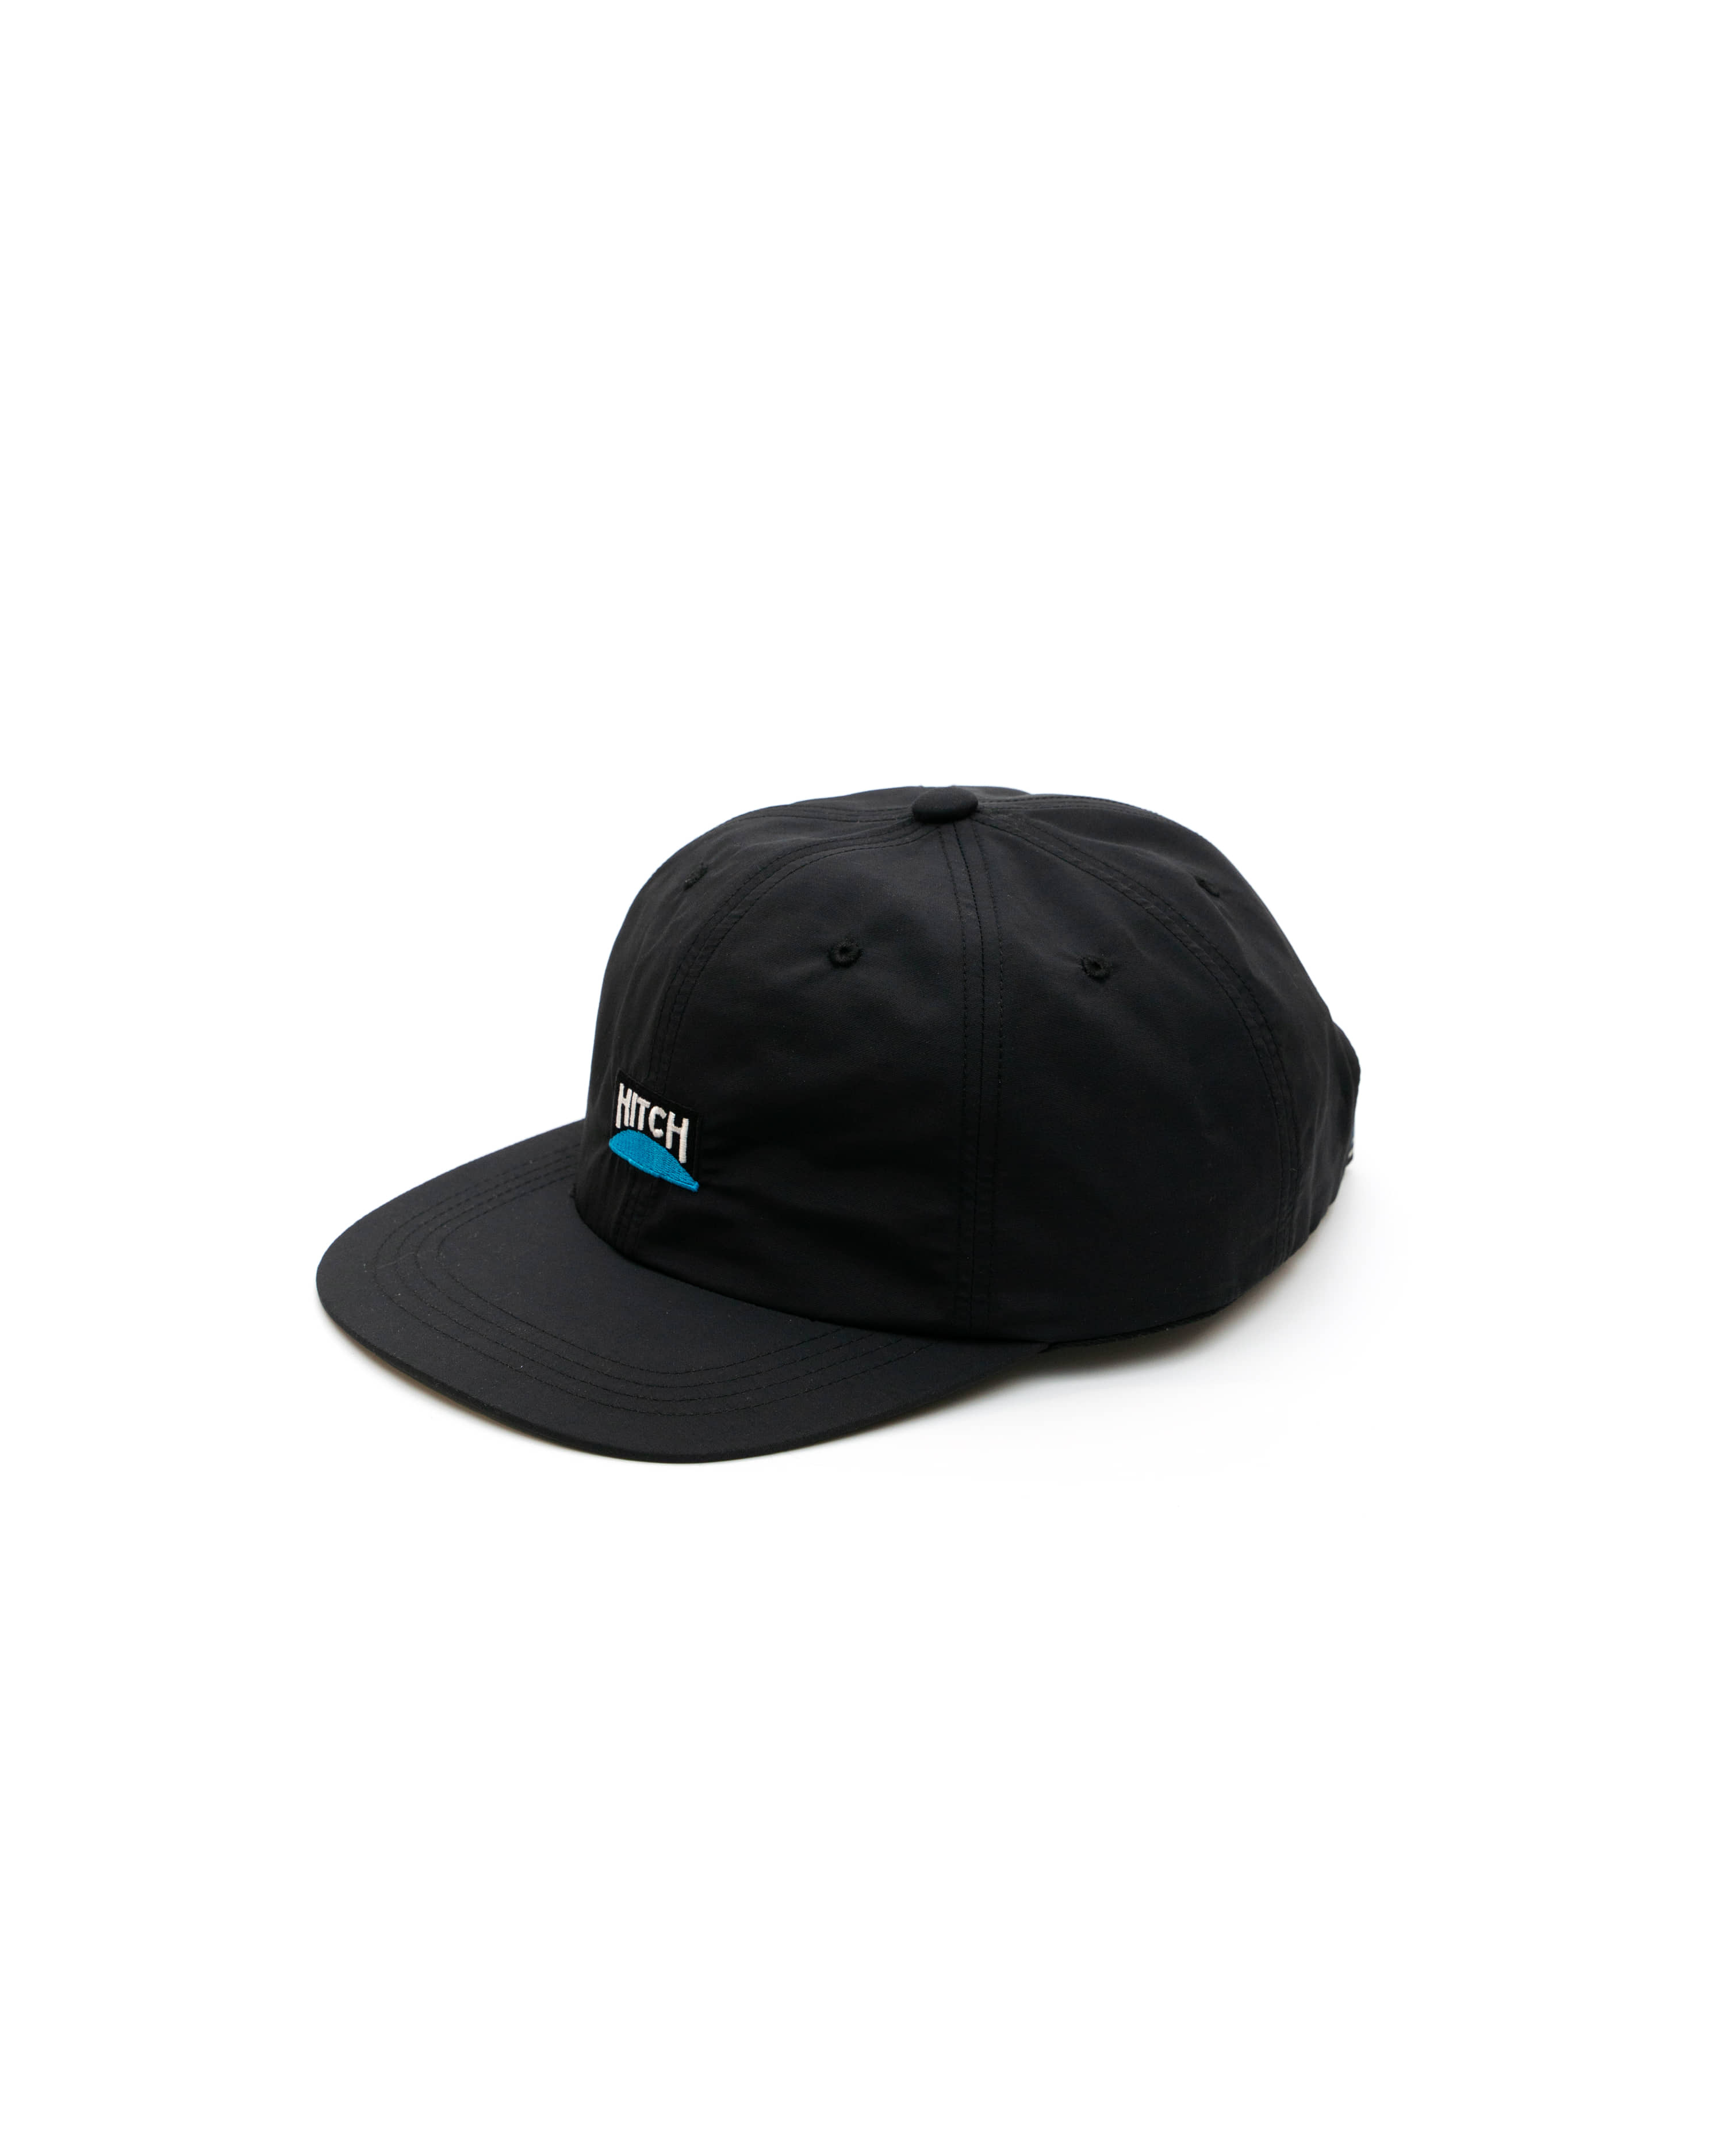 [out of stock] Skate 1 - Black